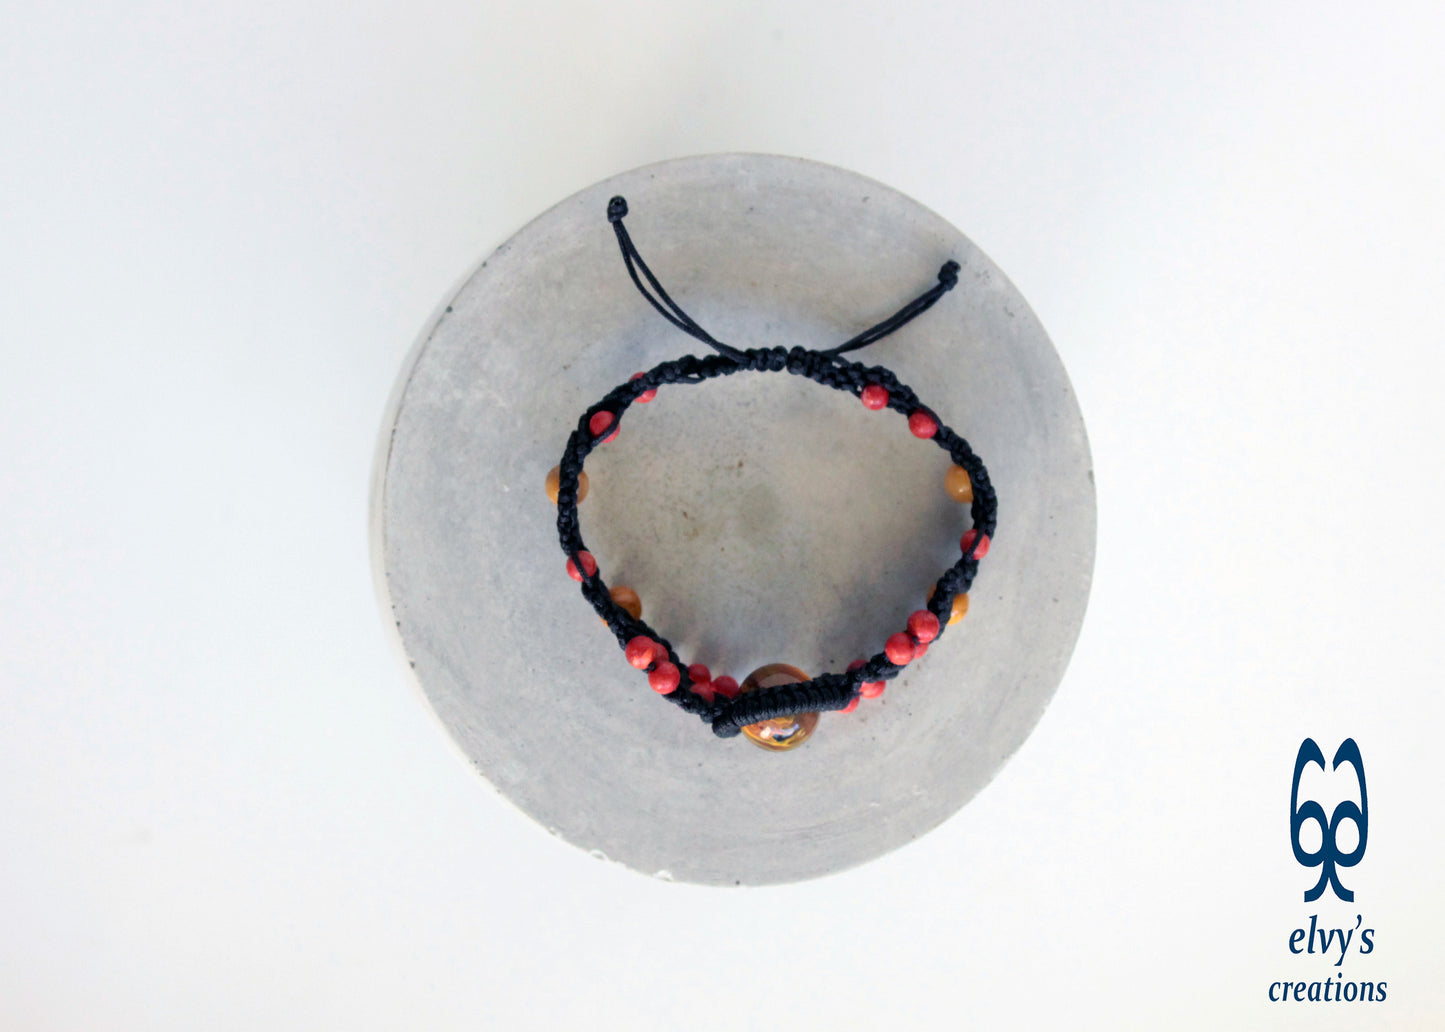 Red Yellow and Black Macrame Beaded Cuff Adjustable Bracelet with Corals, Agate and Crystal for Women 'Big Wave' Bracelet